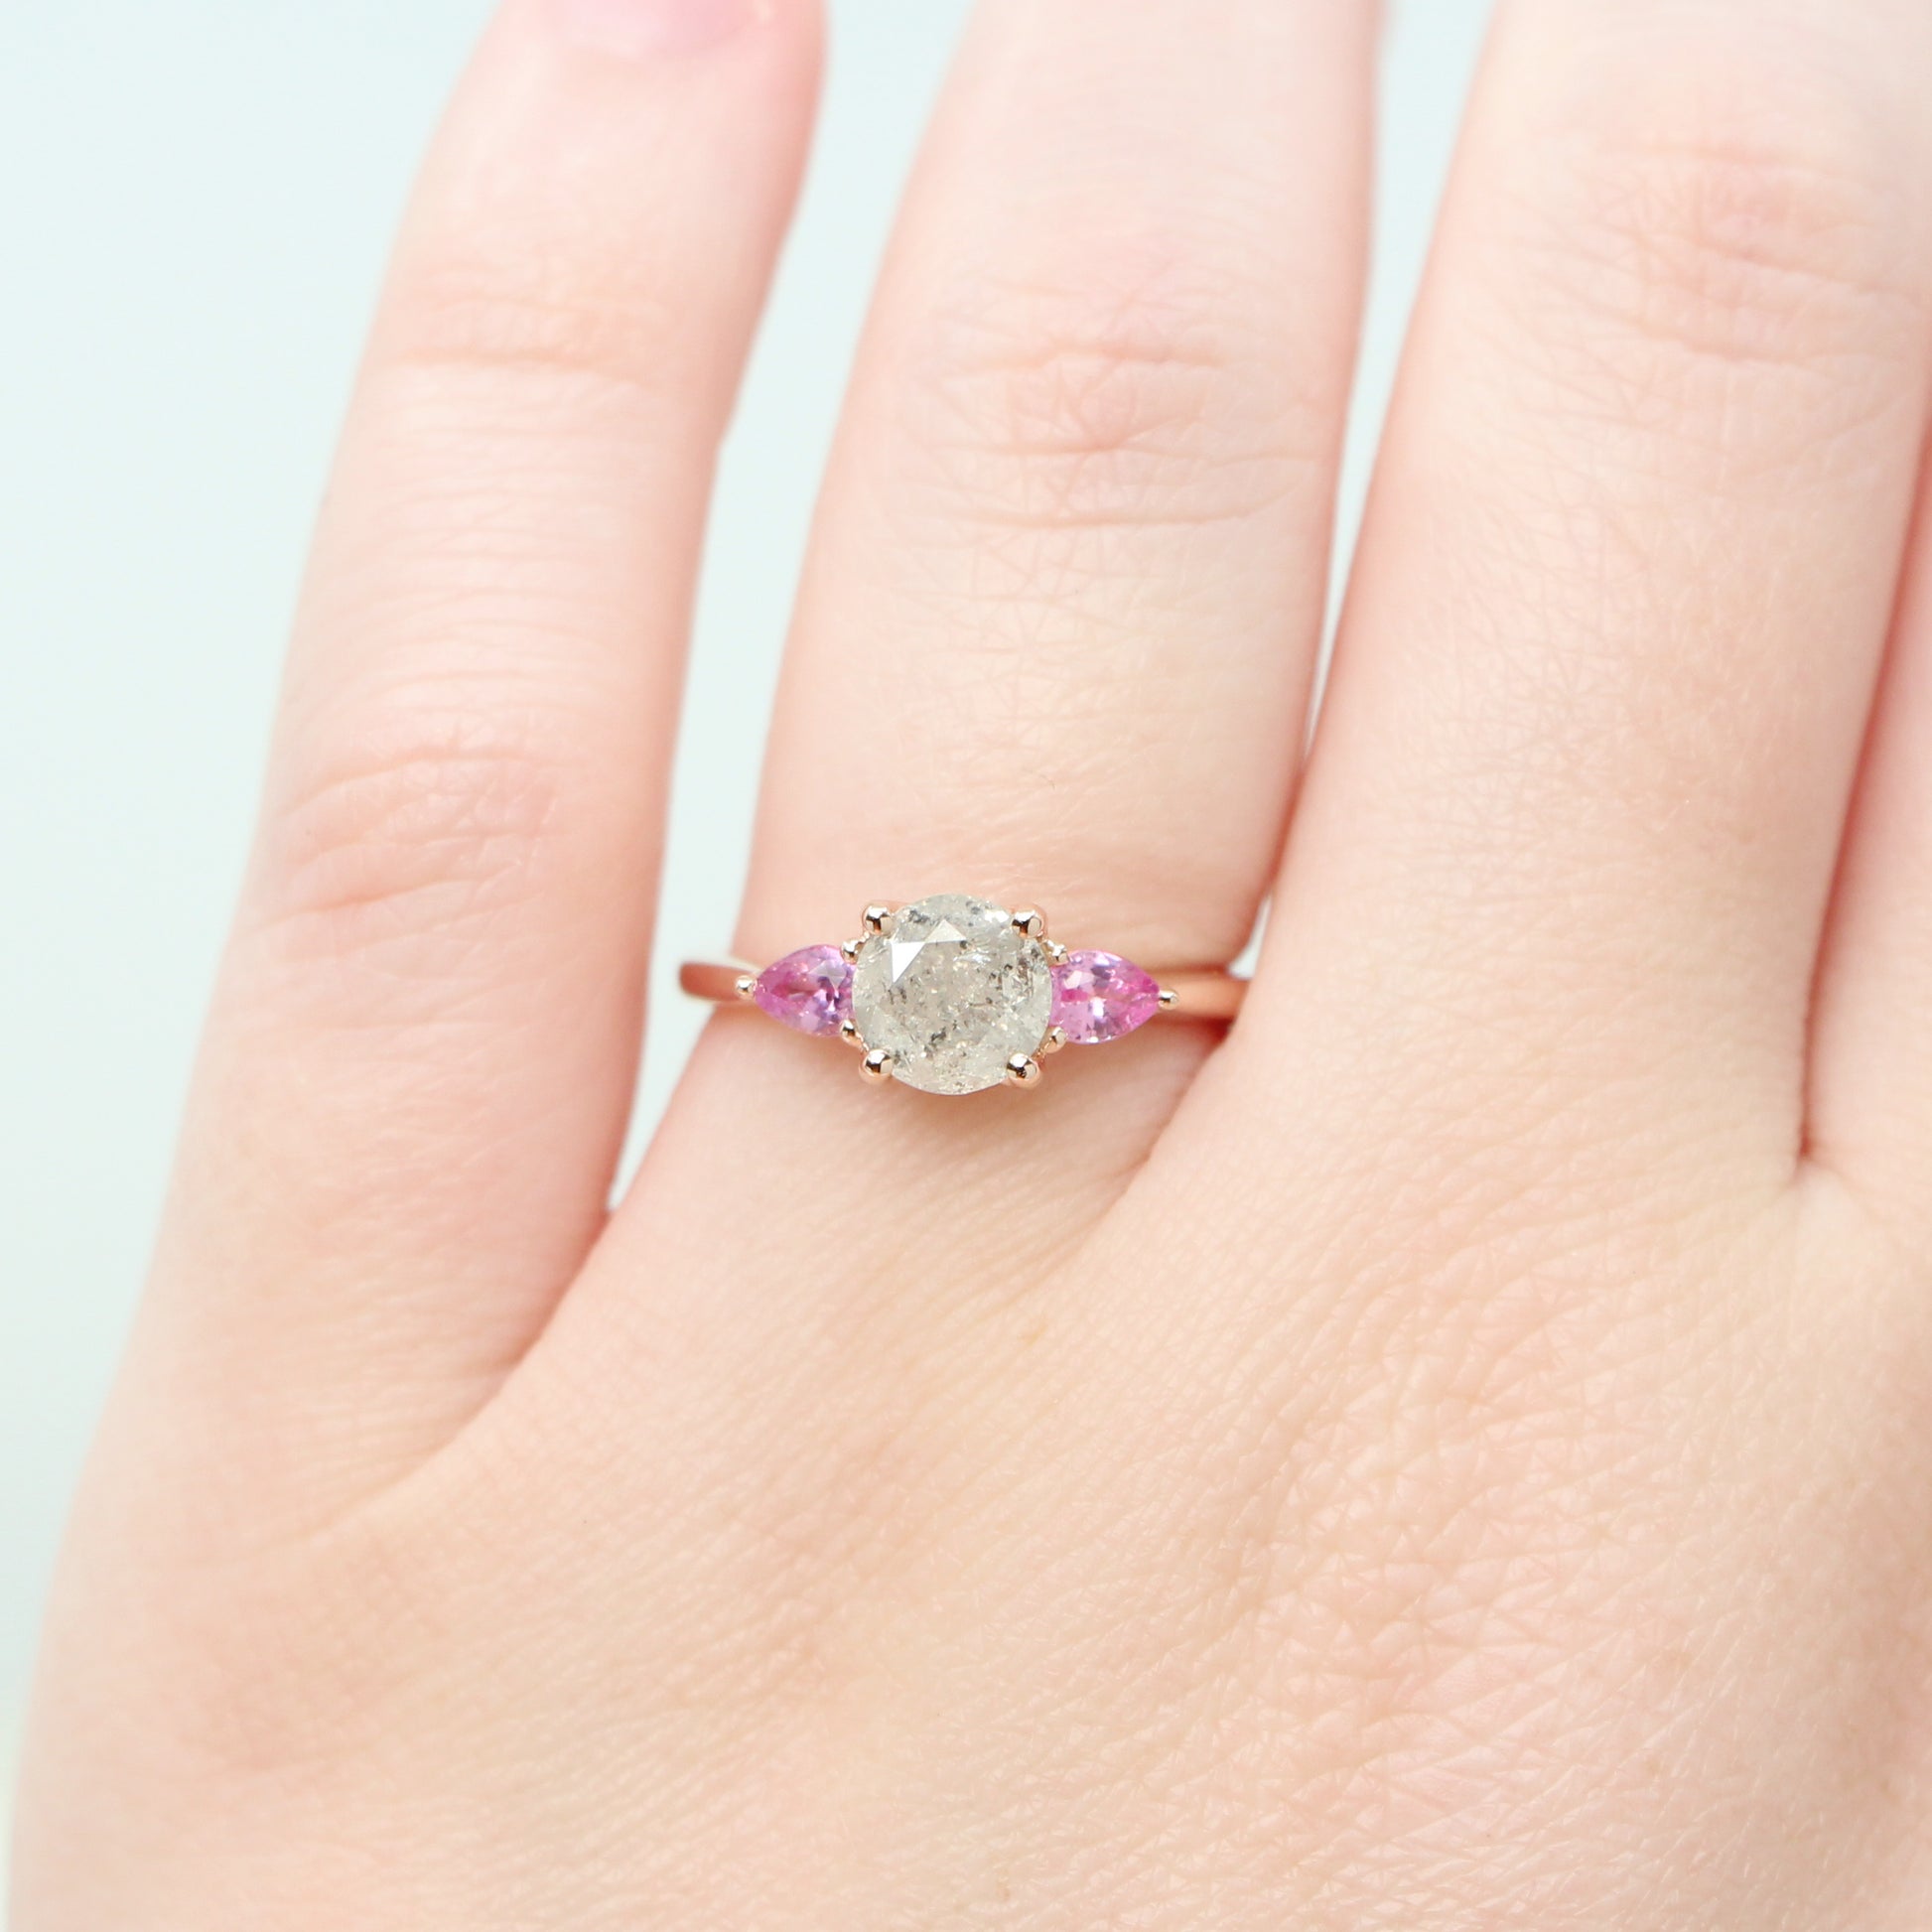 Oleander Ring with a 1.17 Carat Round Light Gray Celestial Diamond and Pink Sapphire Accents in 14k Rose Gold - Ready to Size and Ship - Midwinter Co. Alternative Bridal Rings and Modern Fine Jewelry